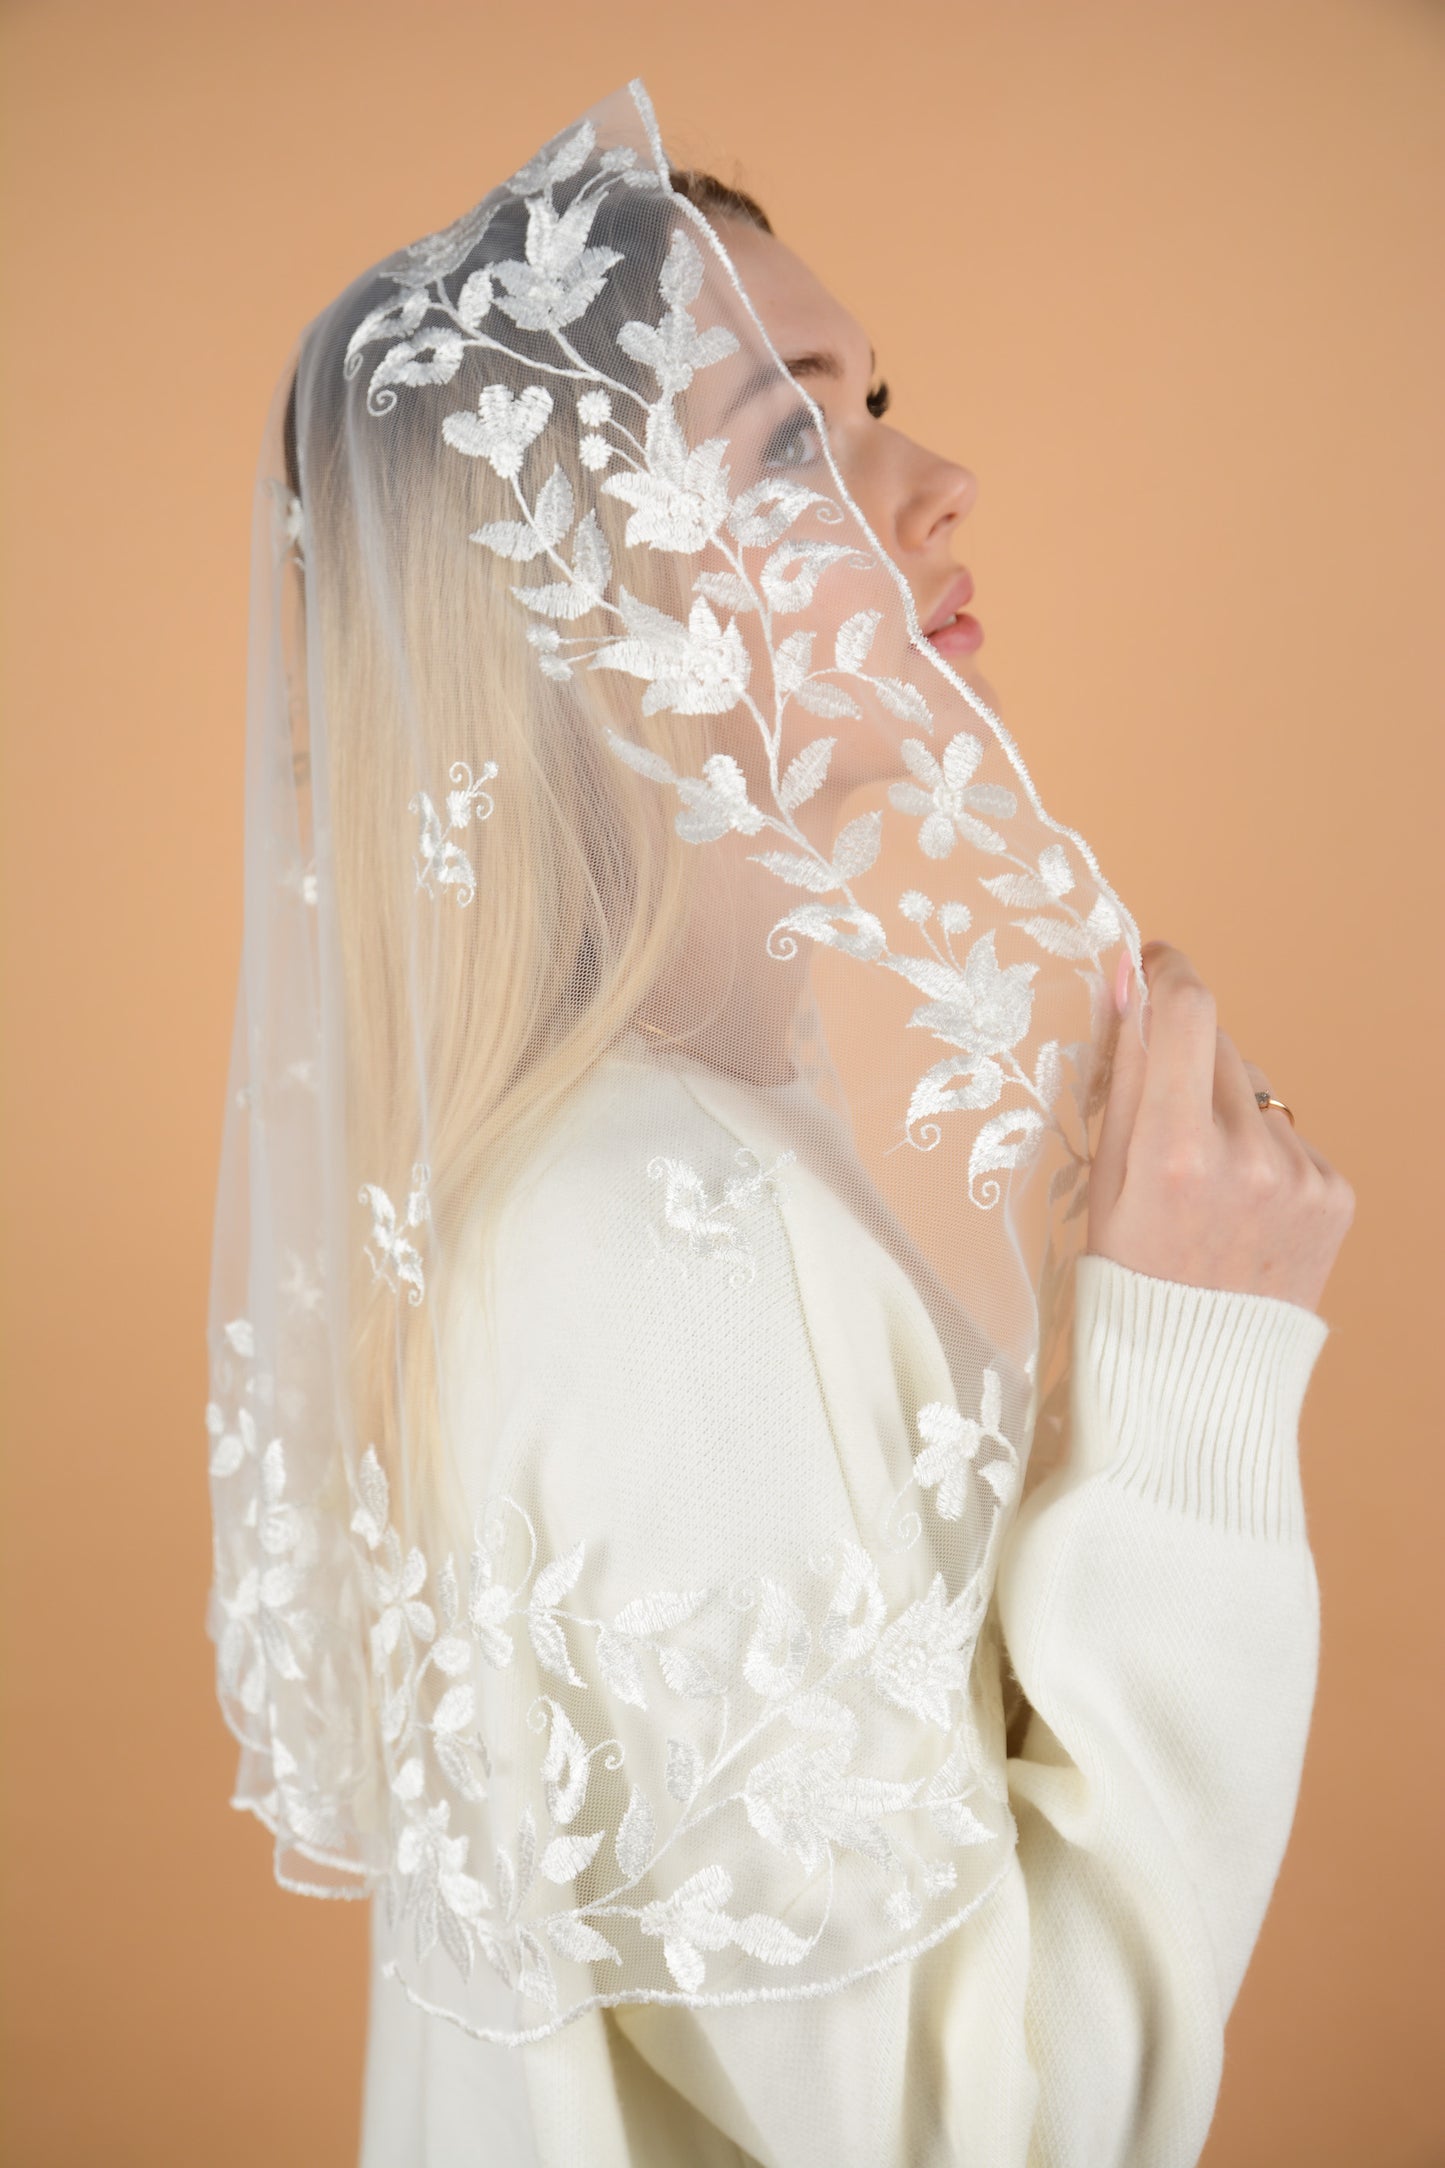 LONG IVORY EXCLUSIVE VEIL - MariaVeils